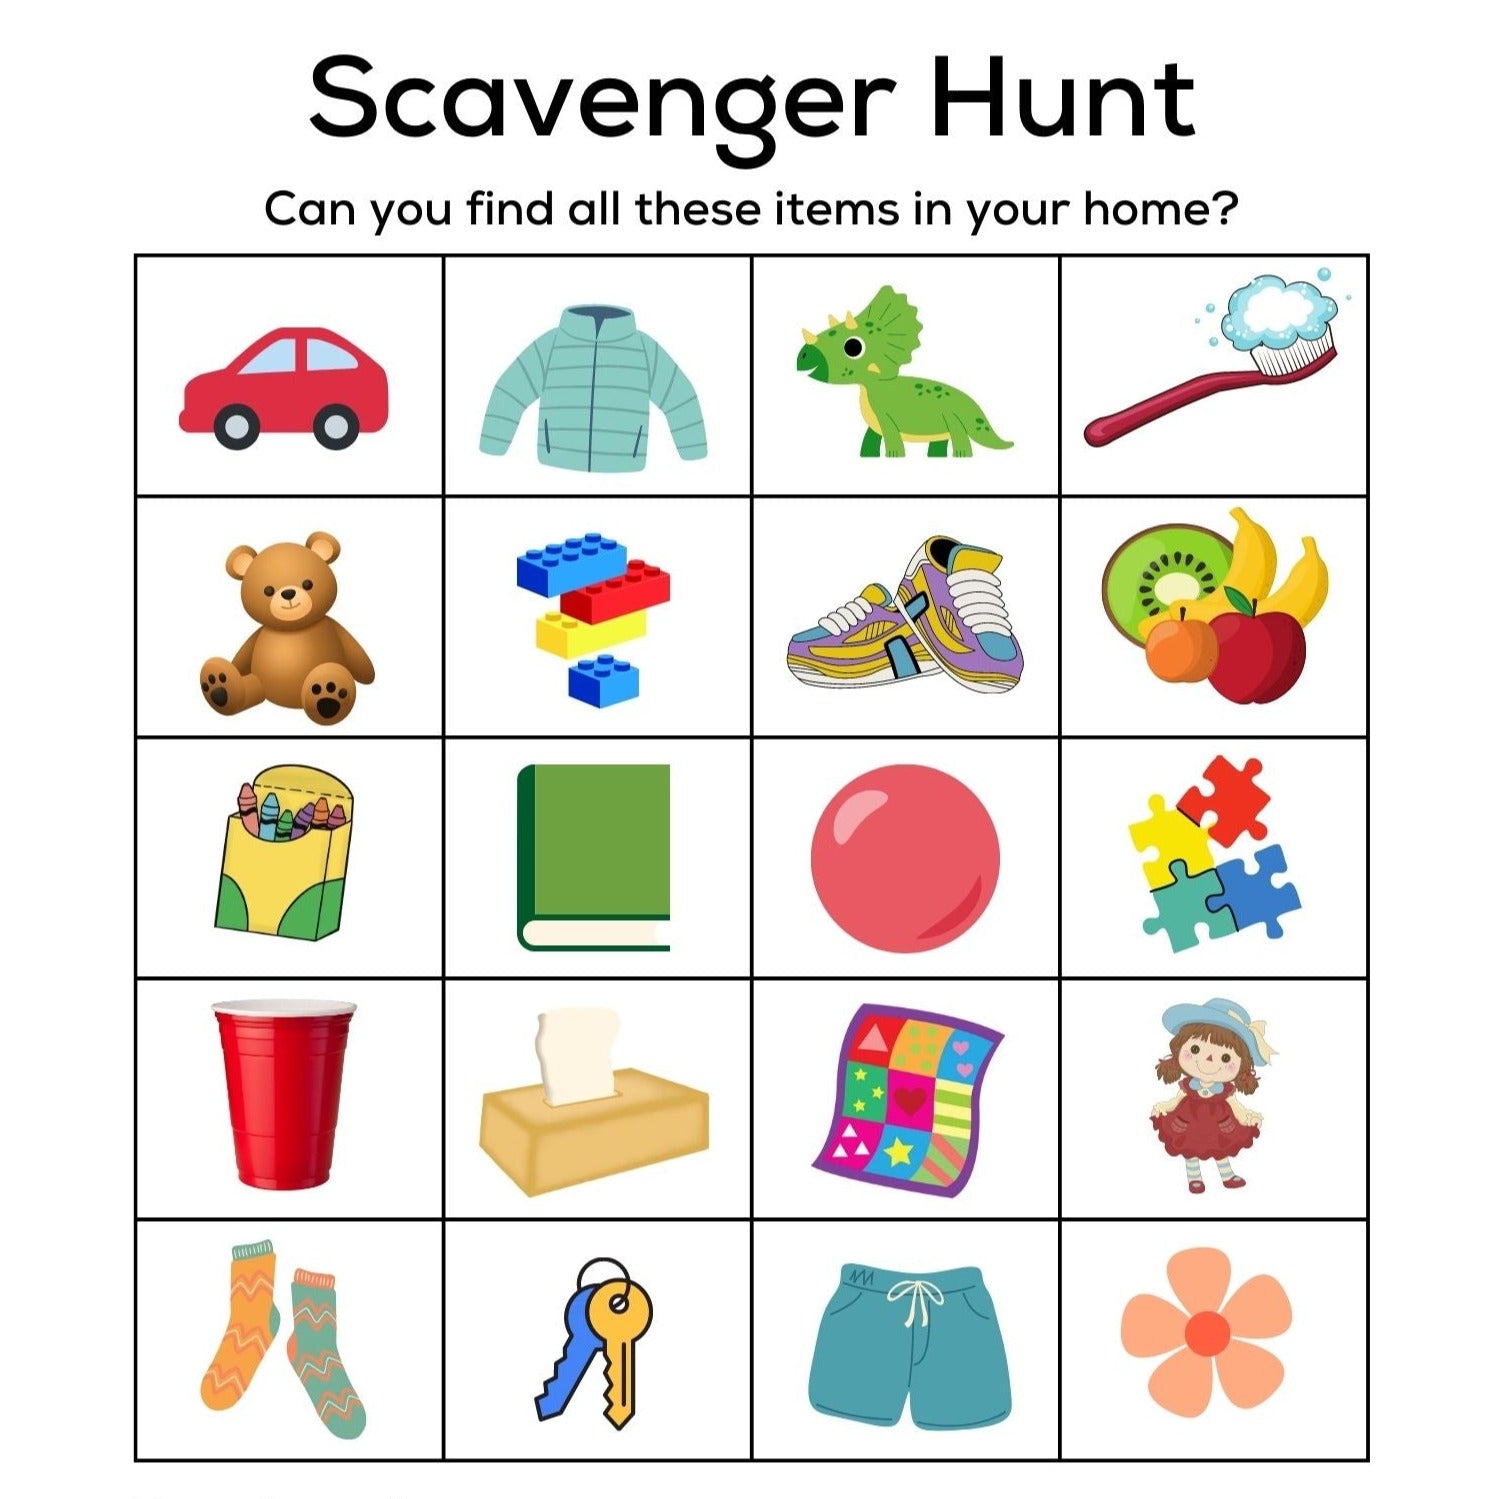 Scavenger hunt with pictures shown for each item a child should find in the hunt. An area at the bottom includes ideas on how to play.